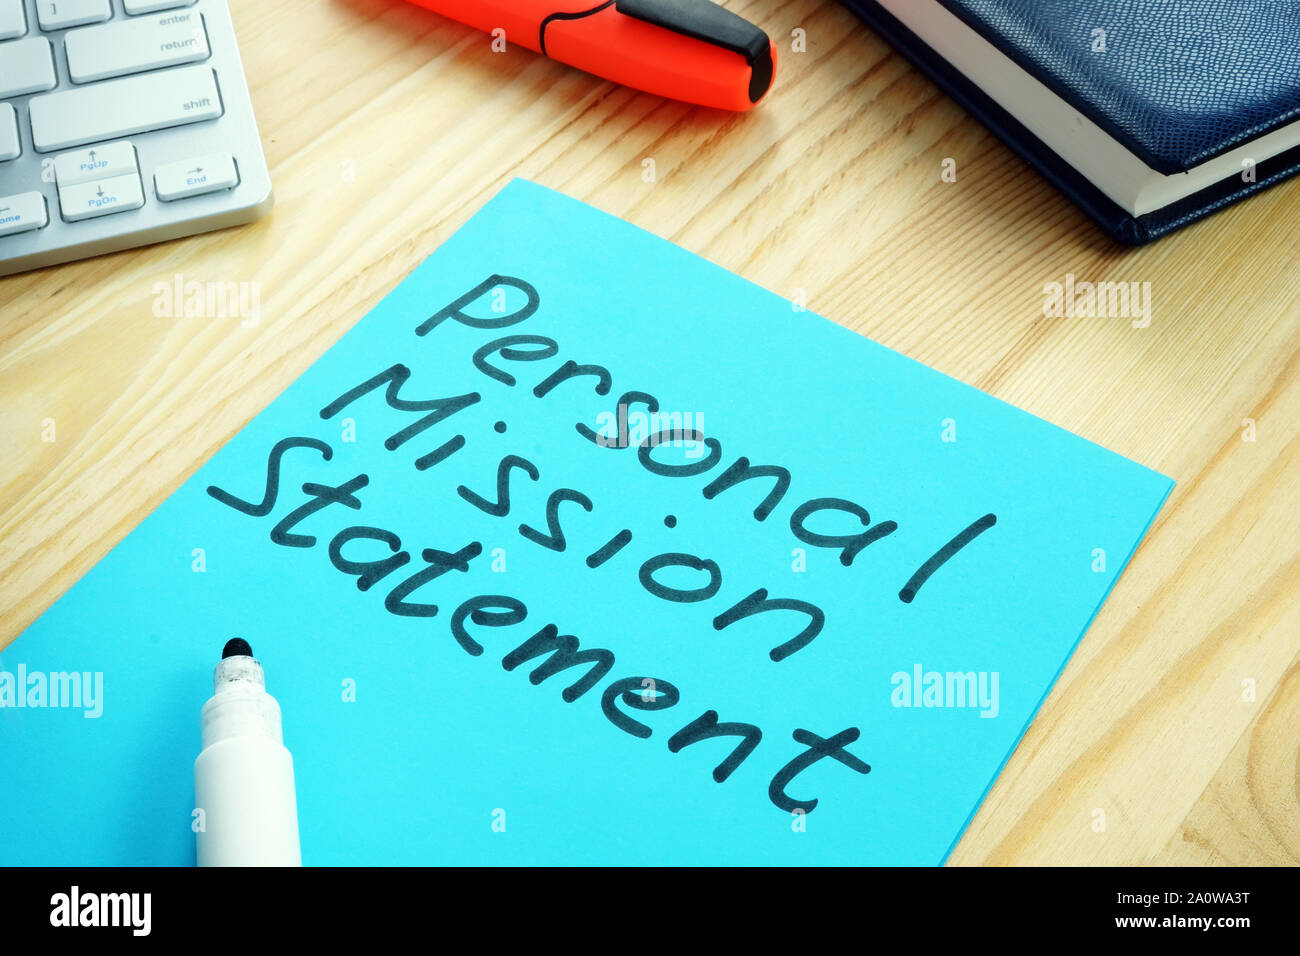 Personal Mission Statement sign on the wooden surface. Stock Photo